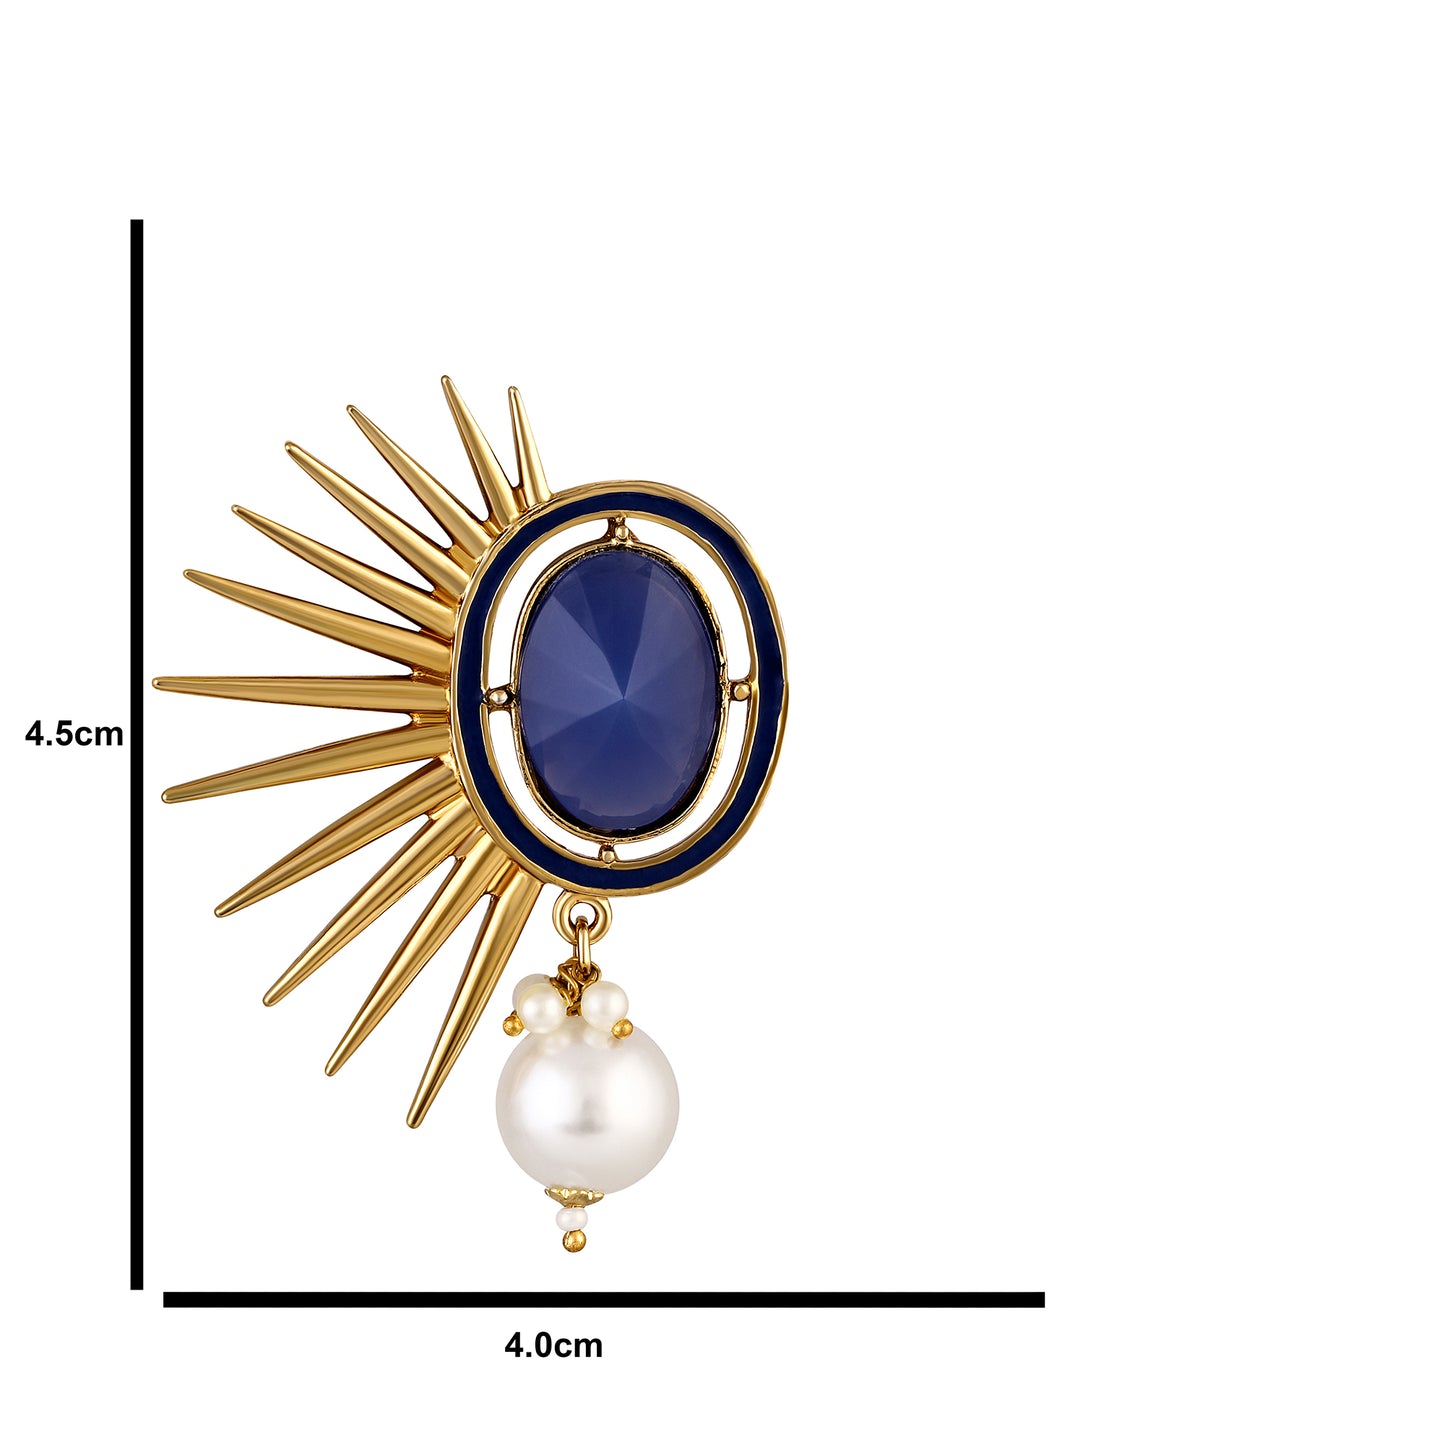 Bdiva 18K Gold Plated Blue Sapphire Earrings With A Pearl Drop.